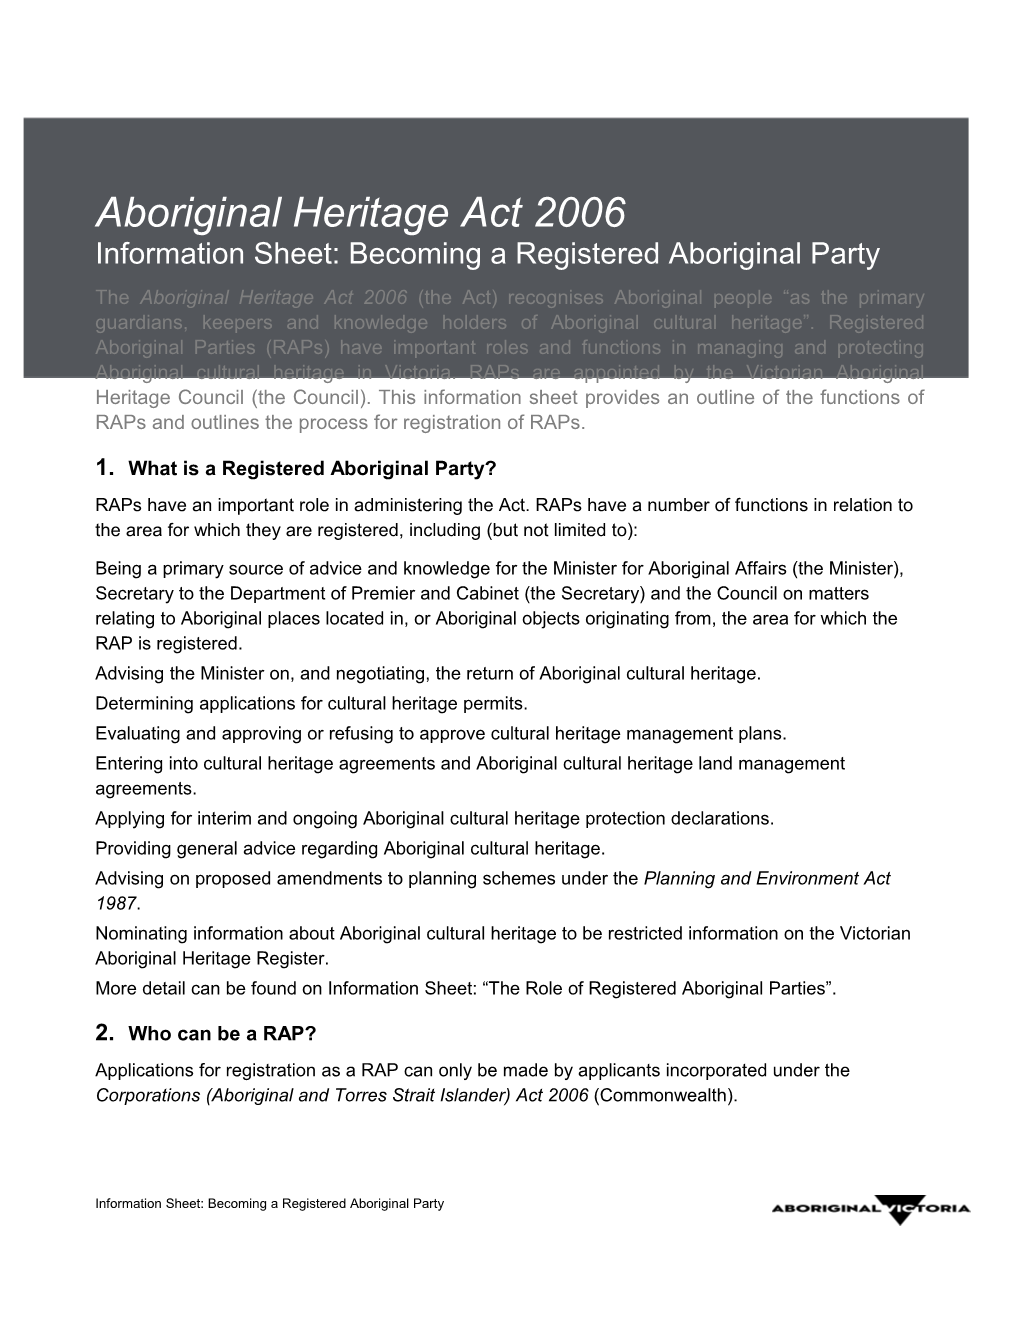 What Is a Registered Aboriginal Party?